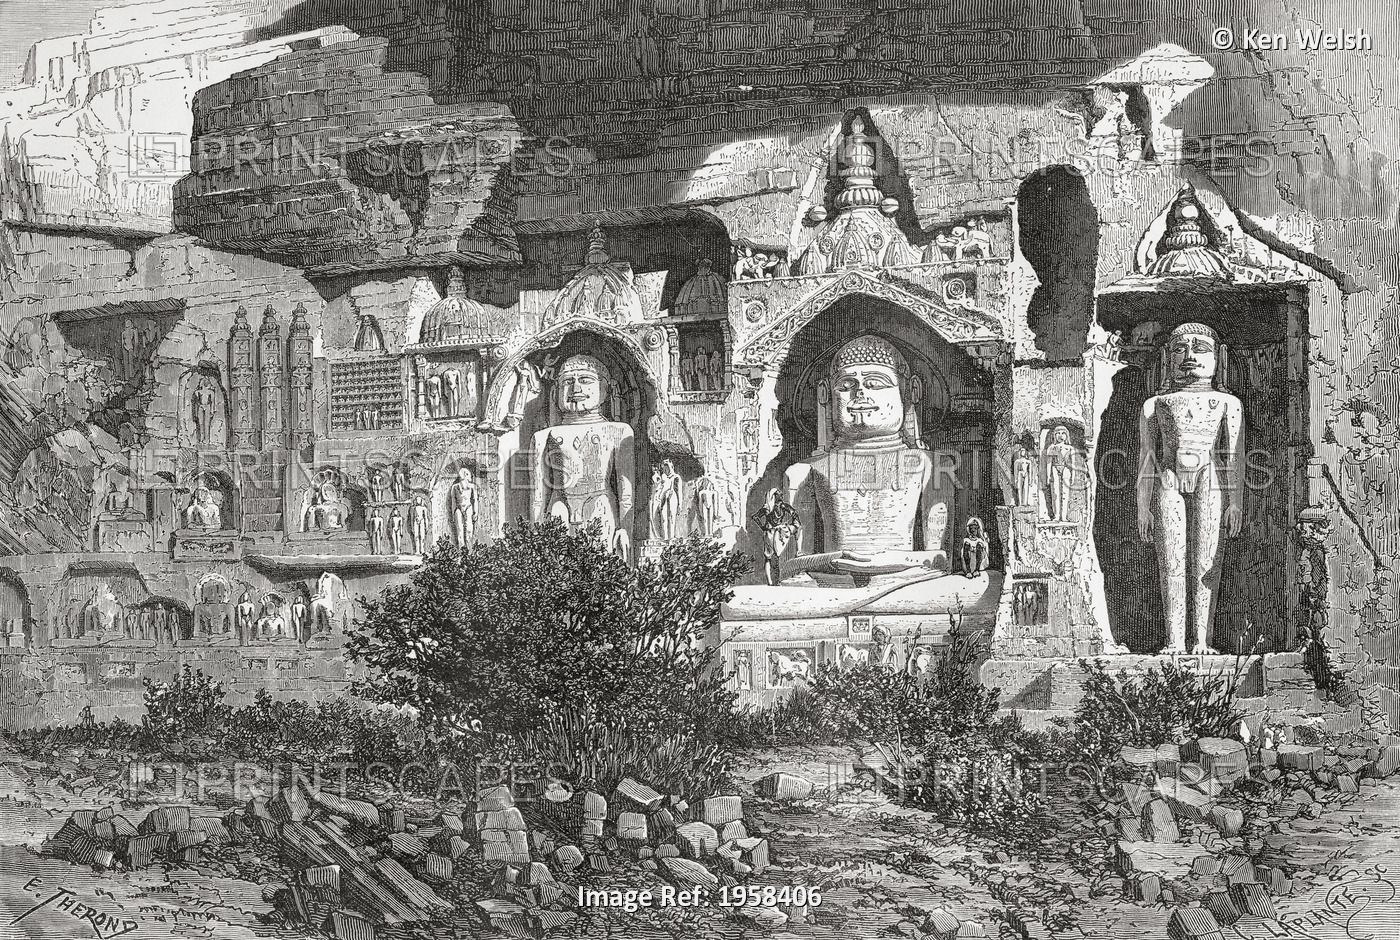 Jain Sculptures At The Gwalior Fort, Madhya Pradesh, India In The 19Th Century. ...